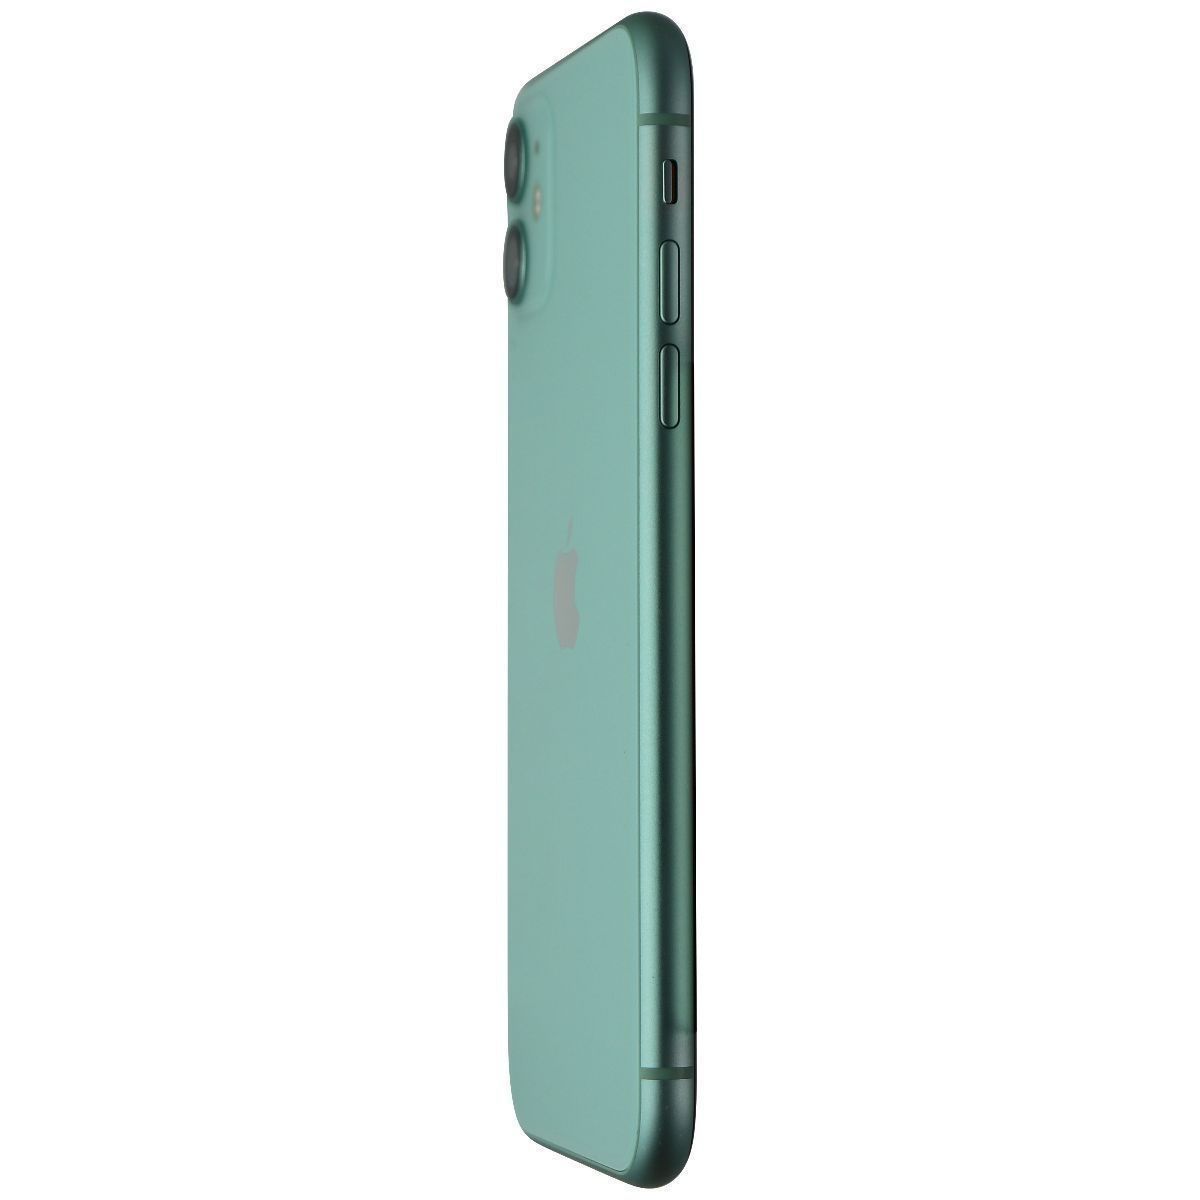 Apple iPhone 11 (6.1-inch) Smartphone (A2111) Unlocked - 64GB / Green Cell Phones & Smartphones Apple    - Simple Cell Bulk Wholesale Pricing - USA Seller